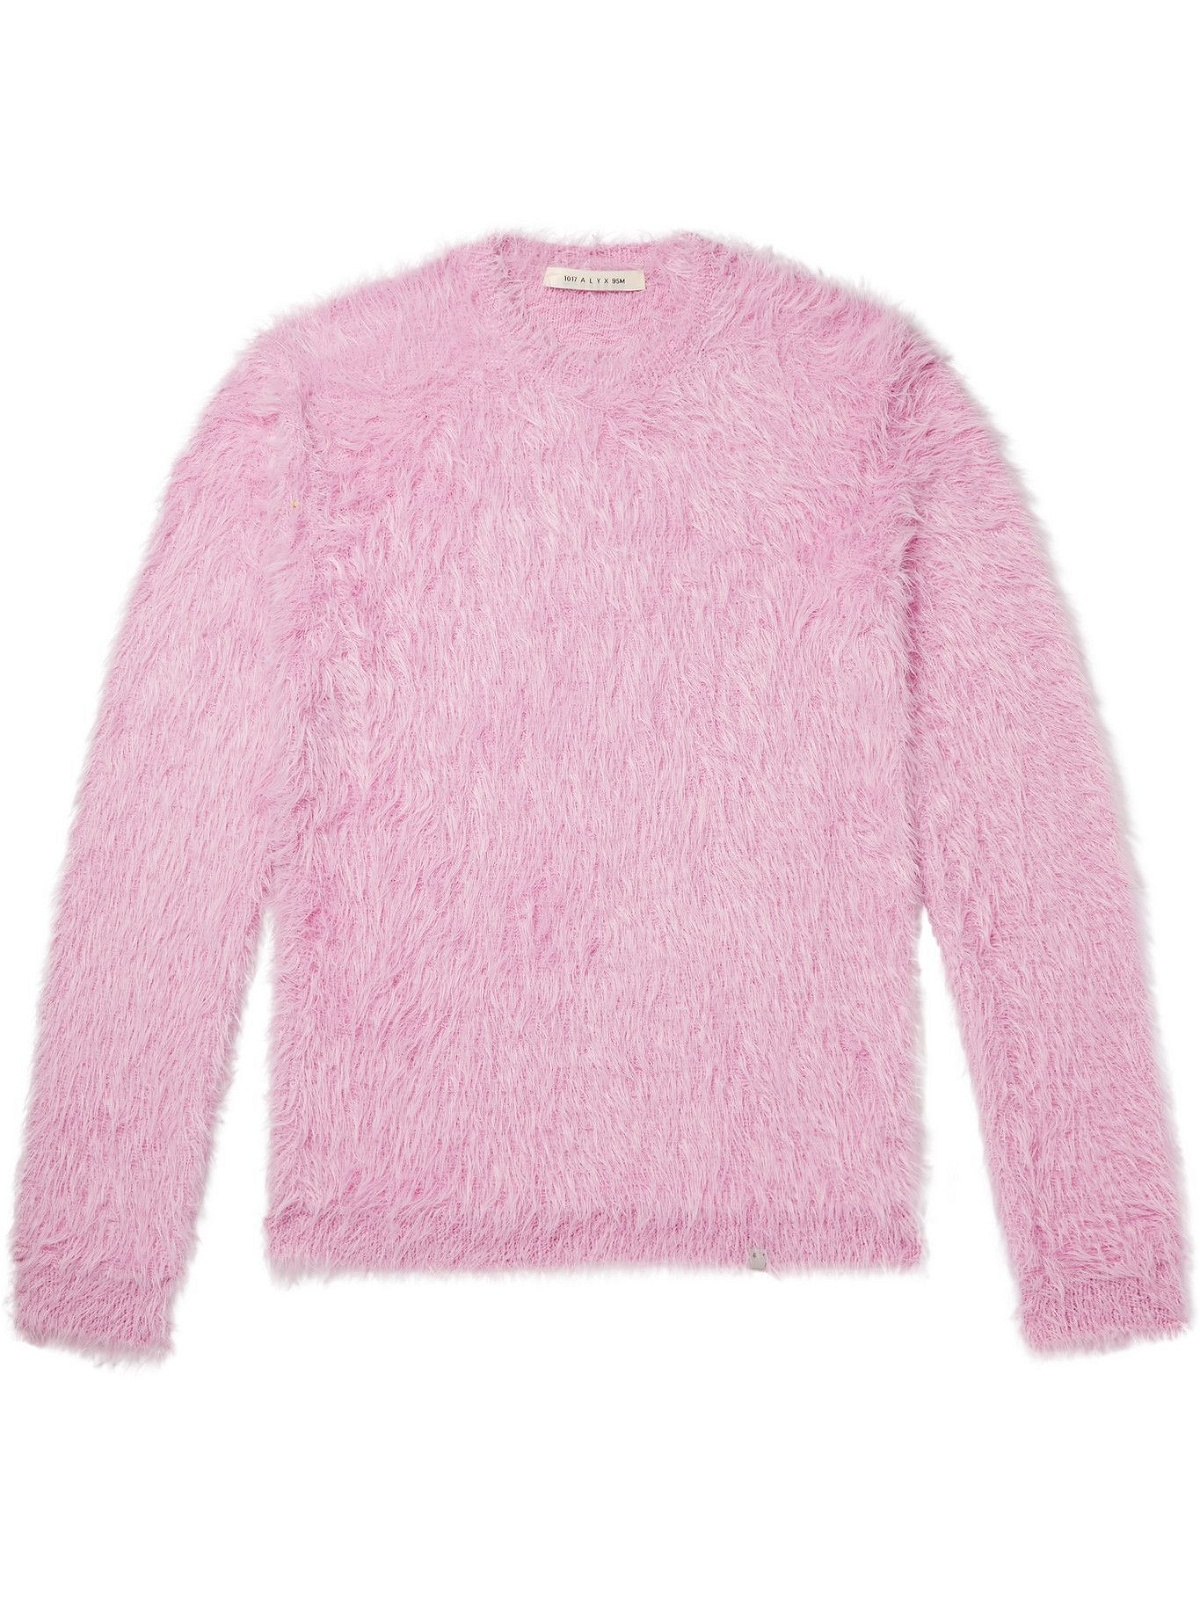 1017 ALYX 9SM - Knitted Sweater - Pink 1017 ALYX 9SM